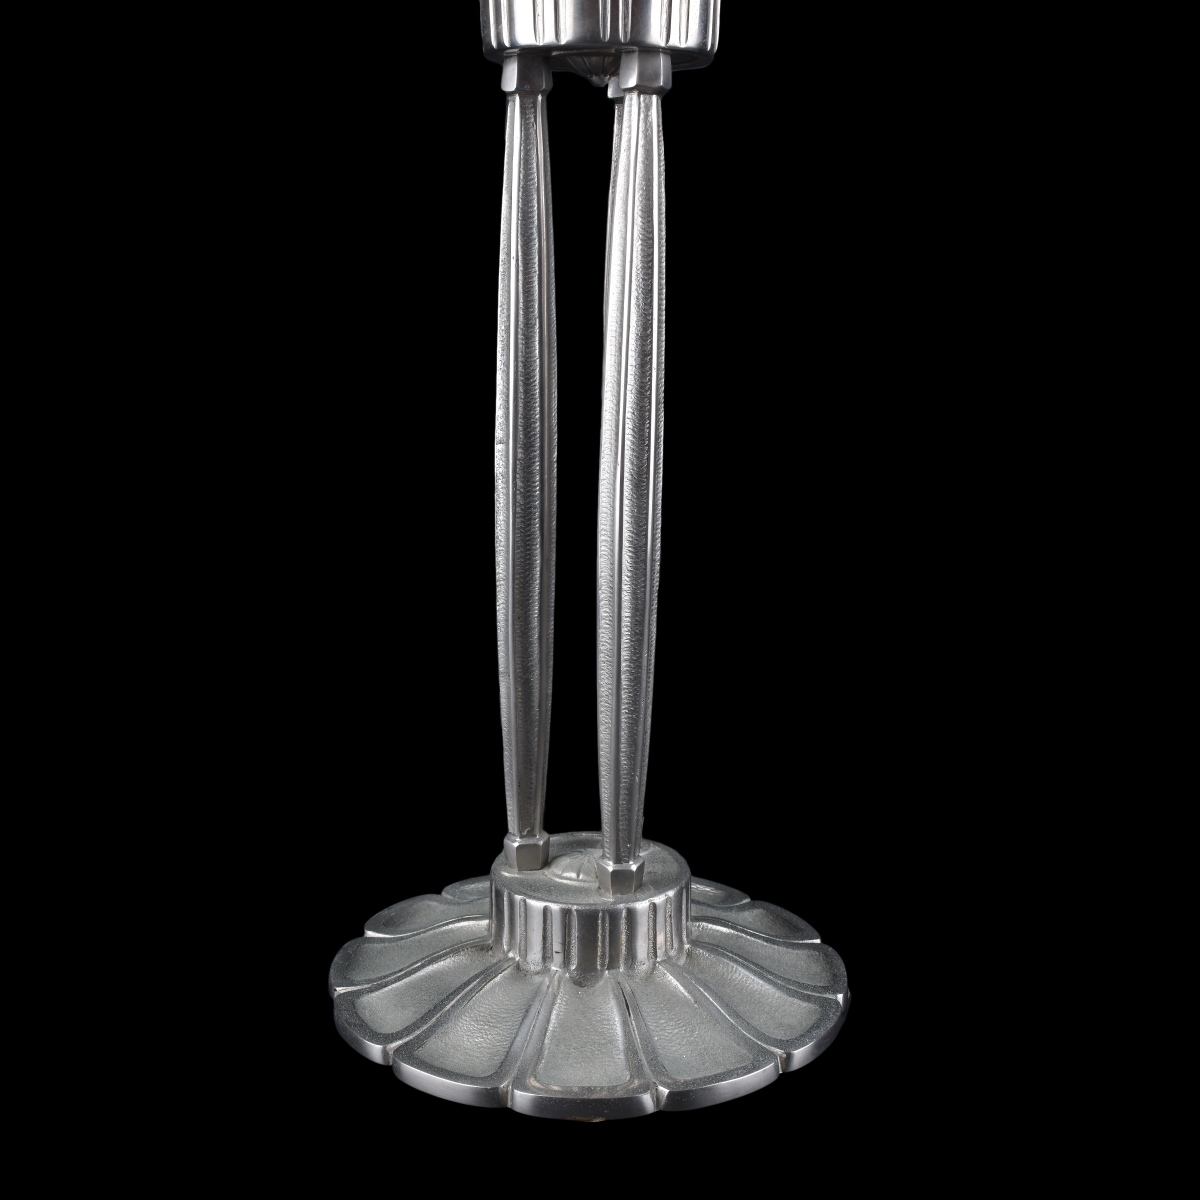 Art Deco Style Lamp with Czech Glass Shade